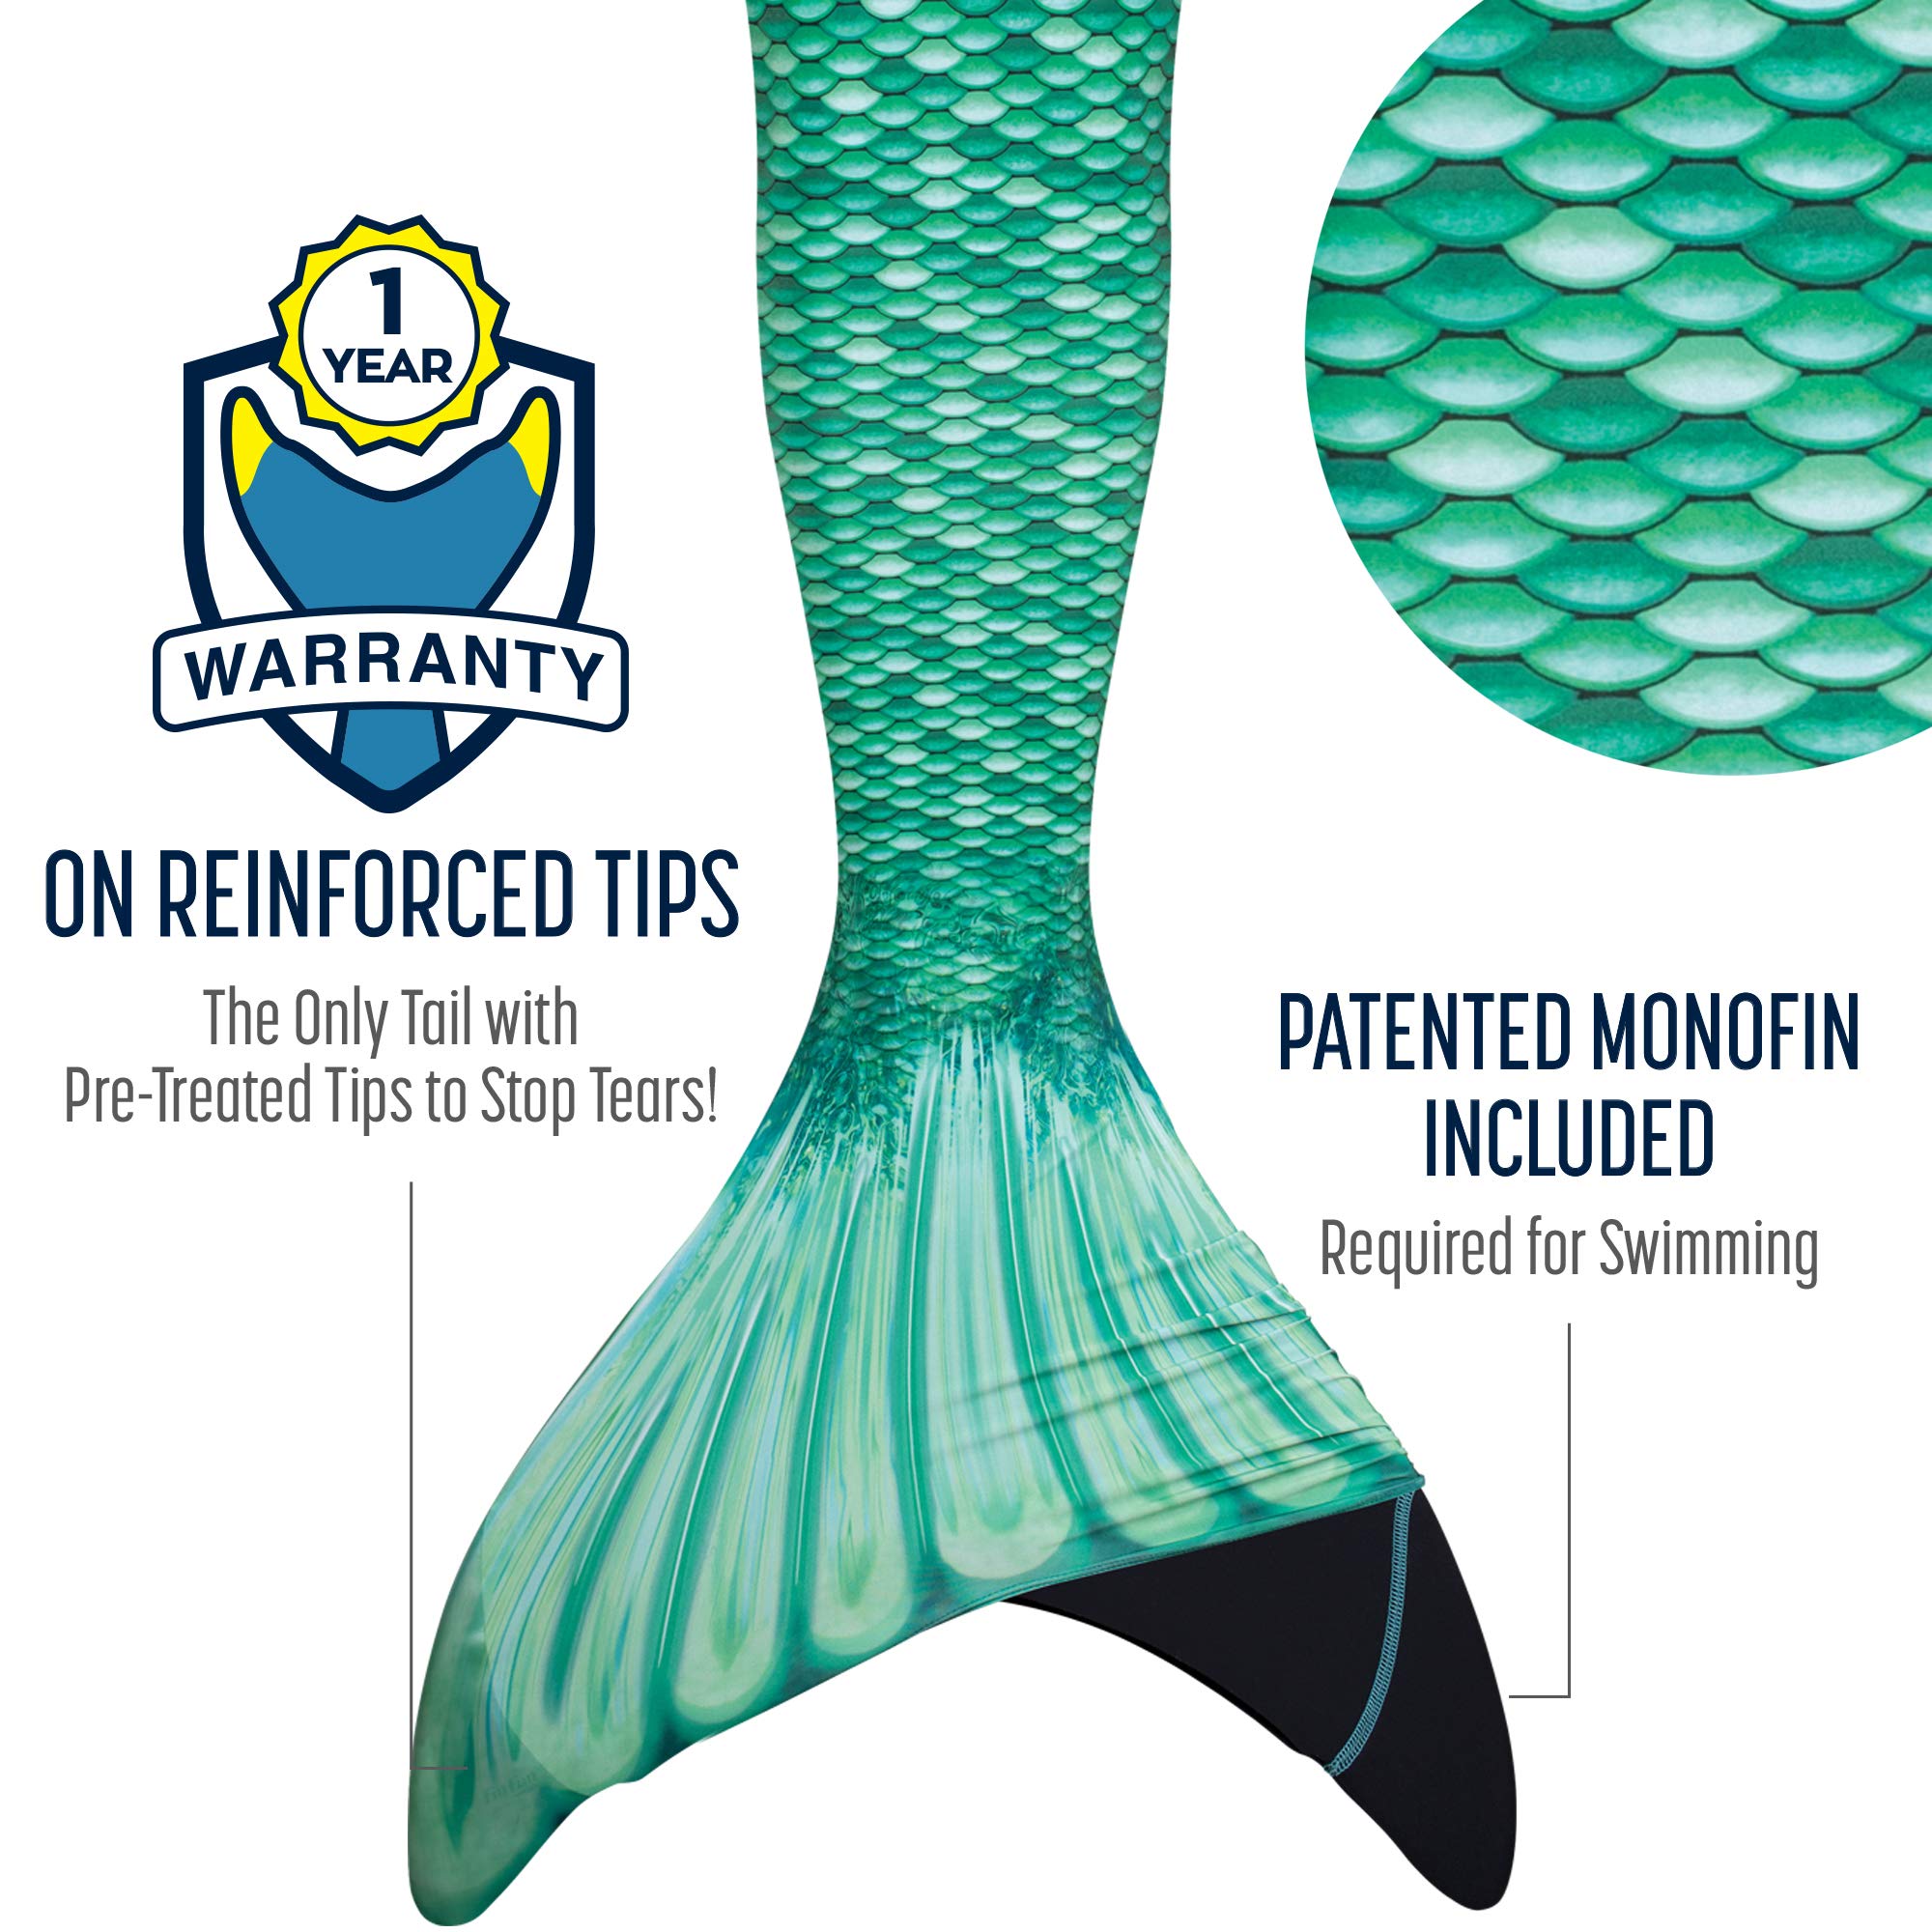 Fin Fun Mermaidens - Mermaid Tails for Swimming for Women, Teens and Adults with Monofin